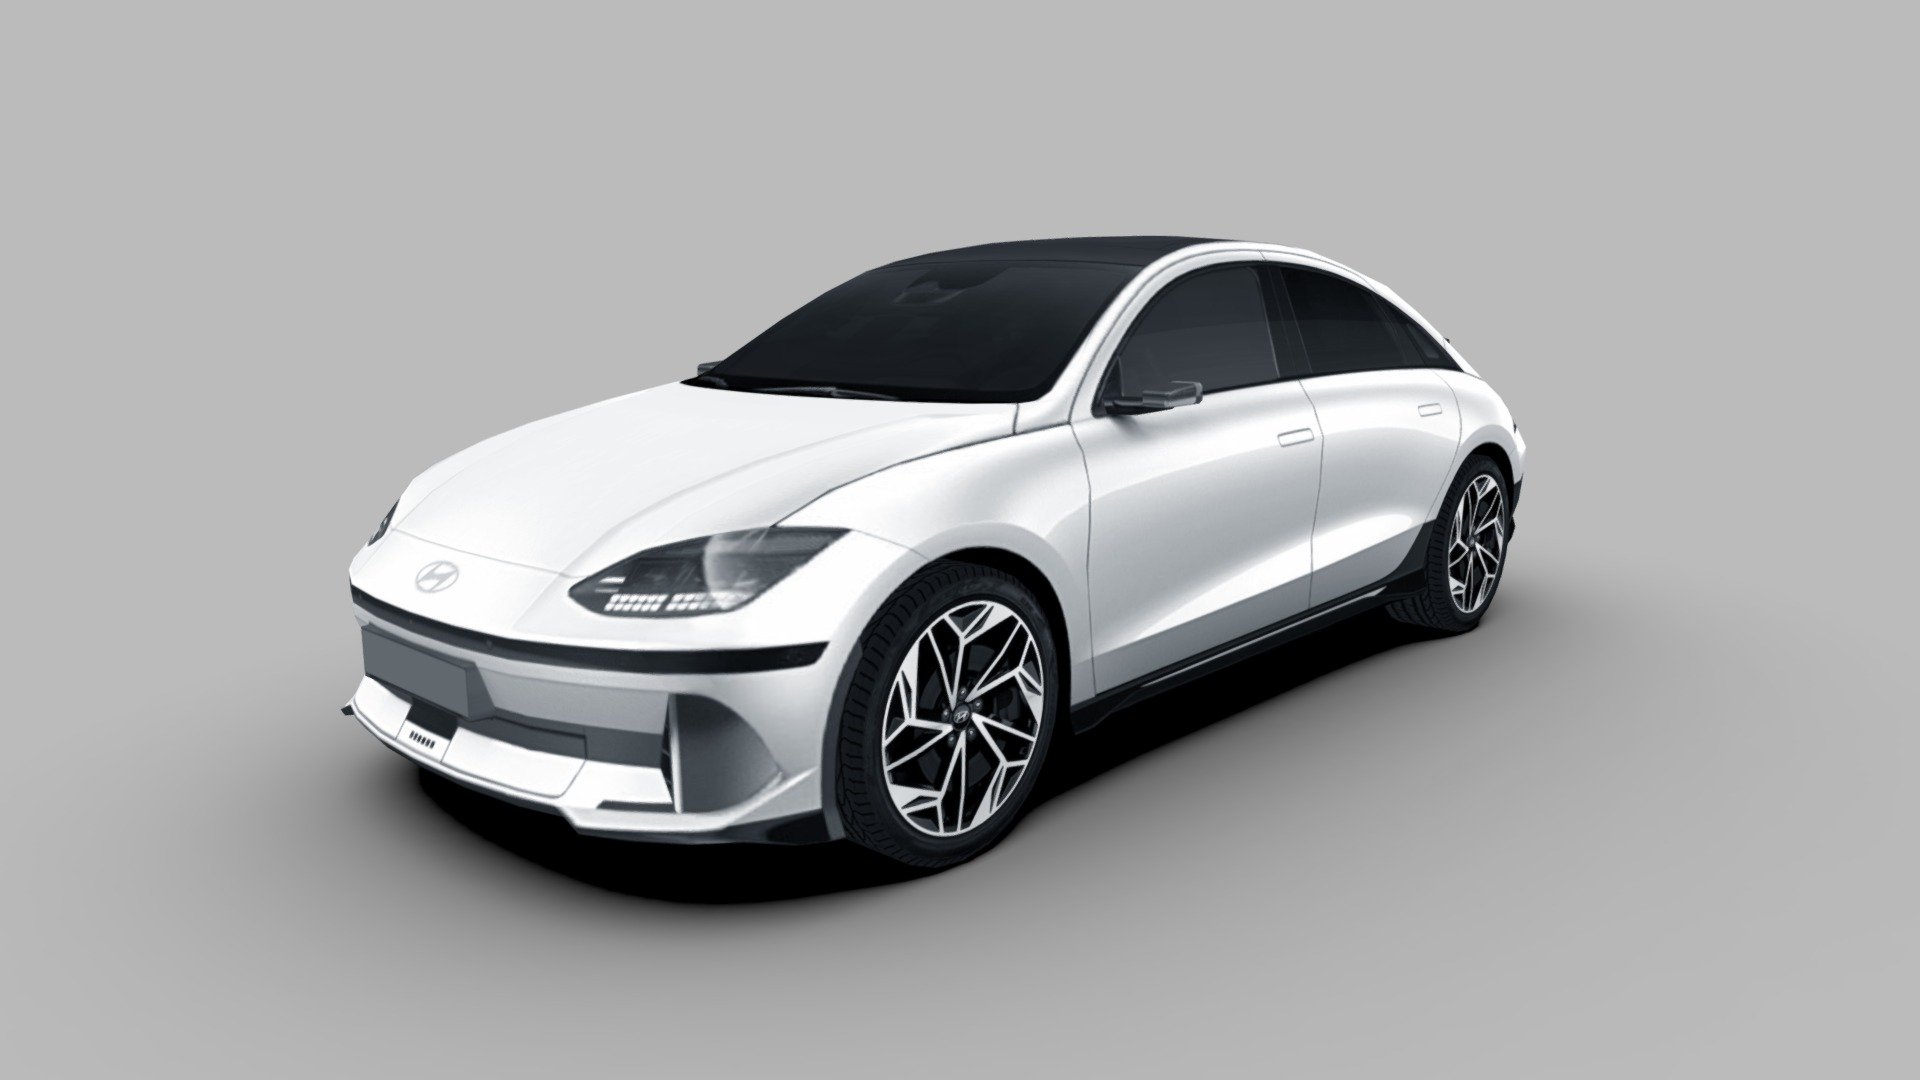 3d model of the 2023 Hyundai Ioniq 6, an all-electric, 4-door fastback sedan mid-size car

The model is very low-poly, full-scale, real photos texture (single 2048 x 2048 png).

Package includes 5 file formats and texture (3ds, fbx, dae, obj and skp)

Hope you enjoy it.

José Bronze - Hyundai Ioniq 6 2023 - Buy Royalty Free 3D model by Jose Bronze (@pinceladas3d) 3d model